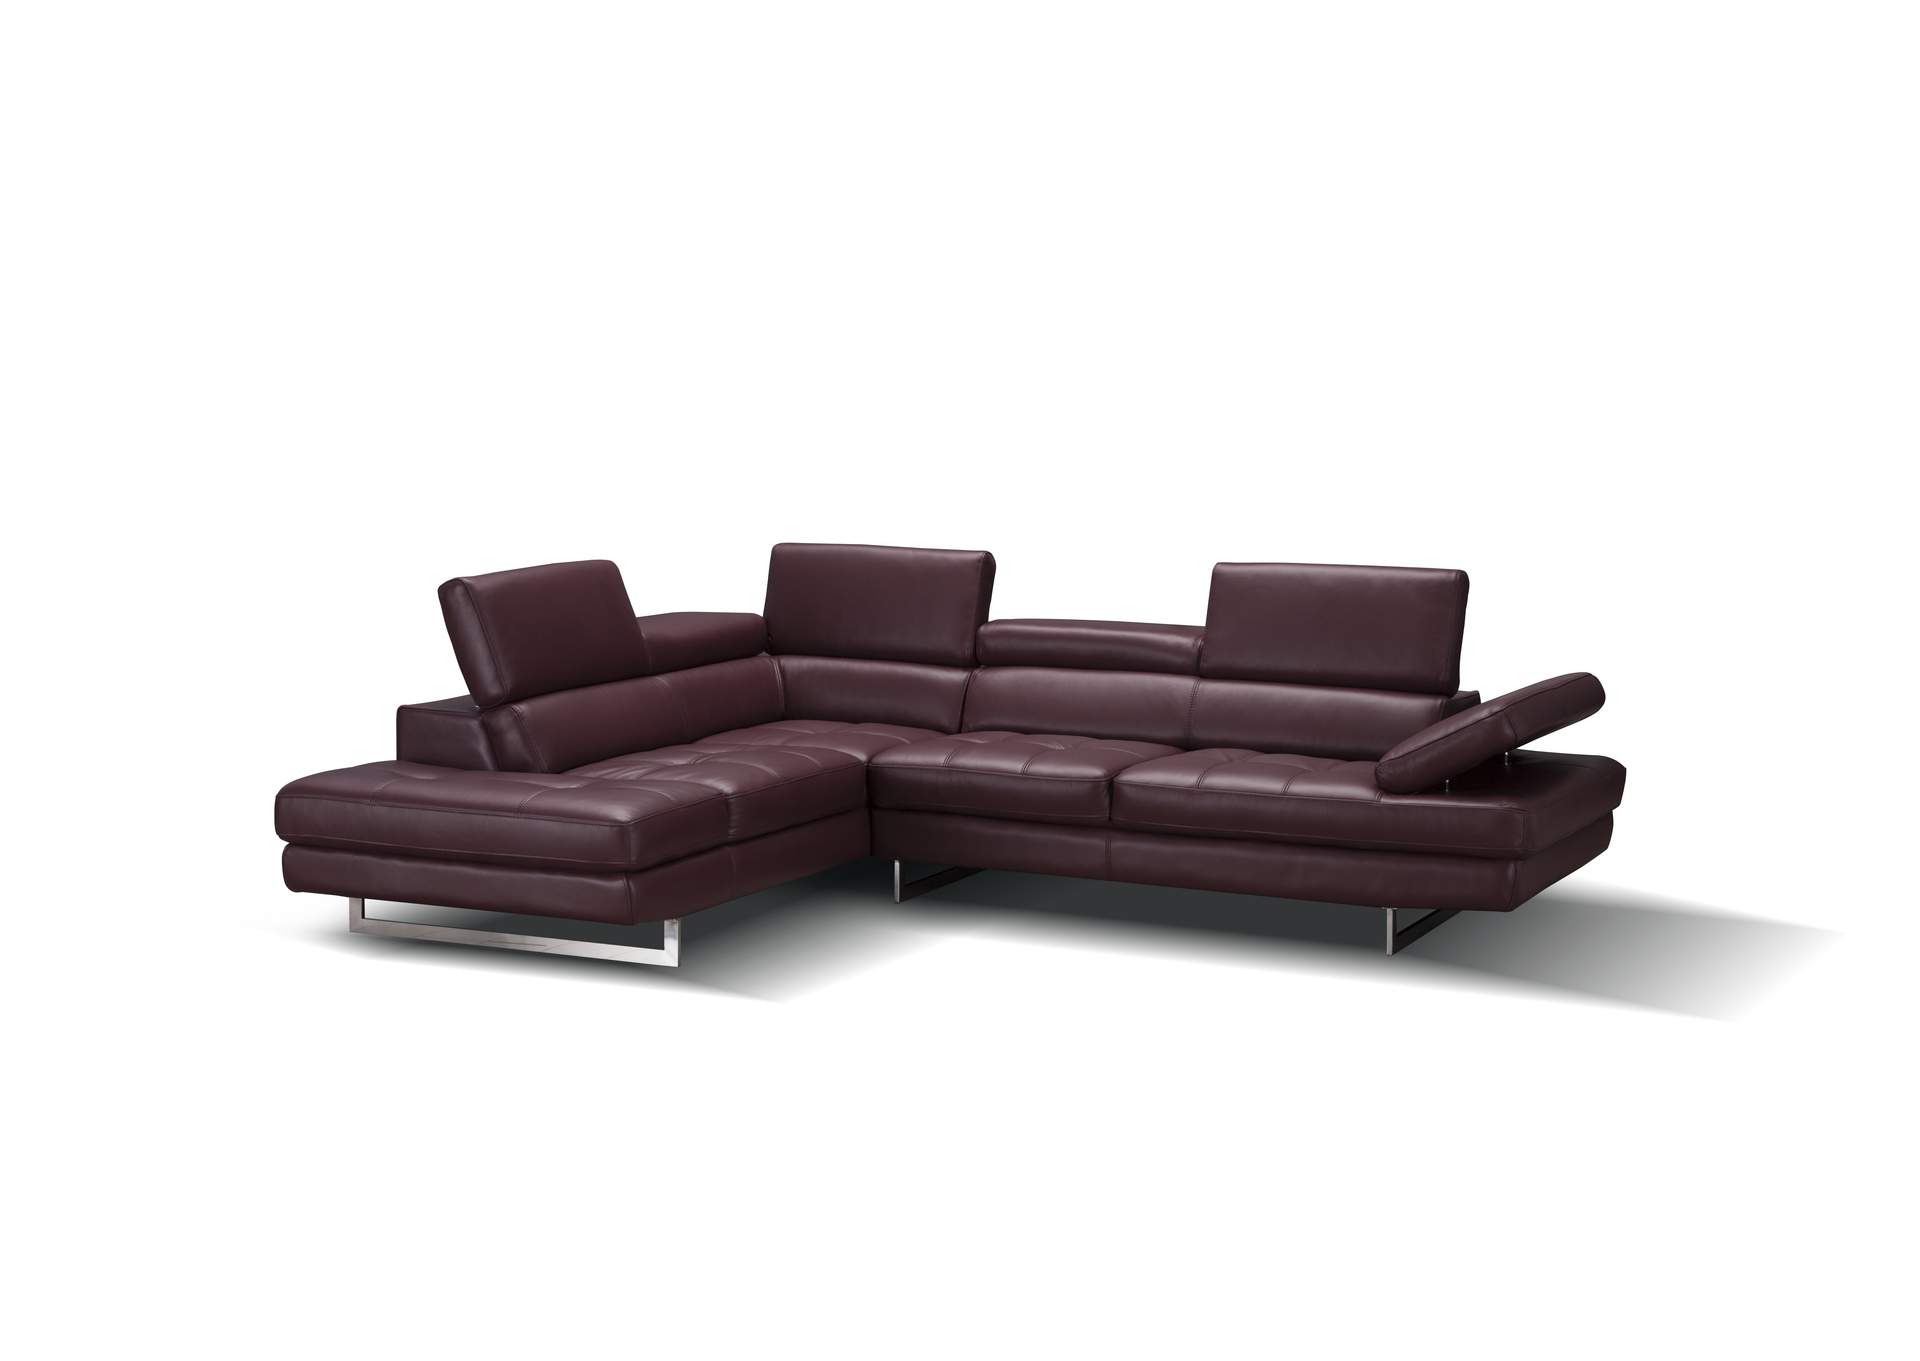 A761 Italian Leather Sectional Maroon In Left Hand Facing,J&M Furniture